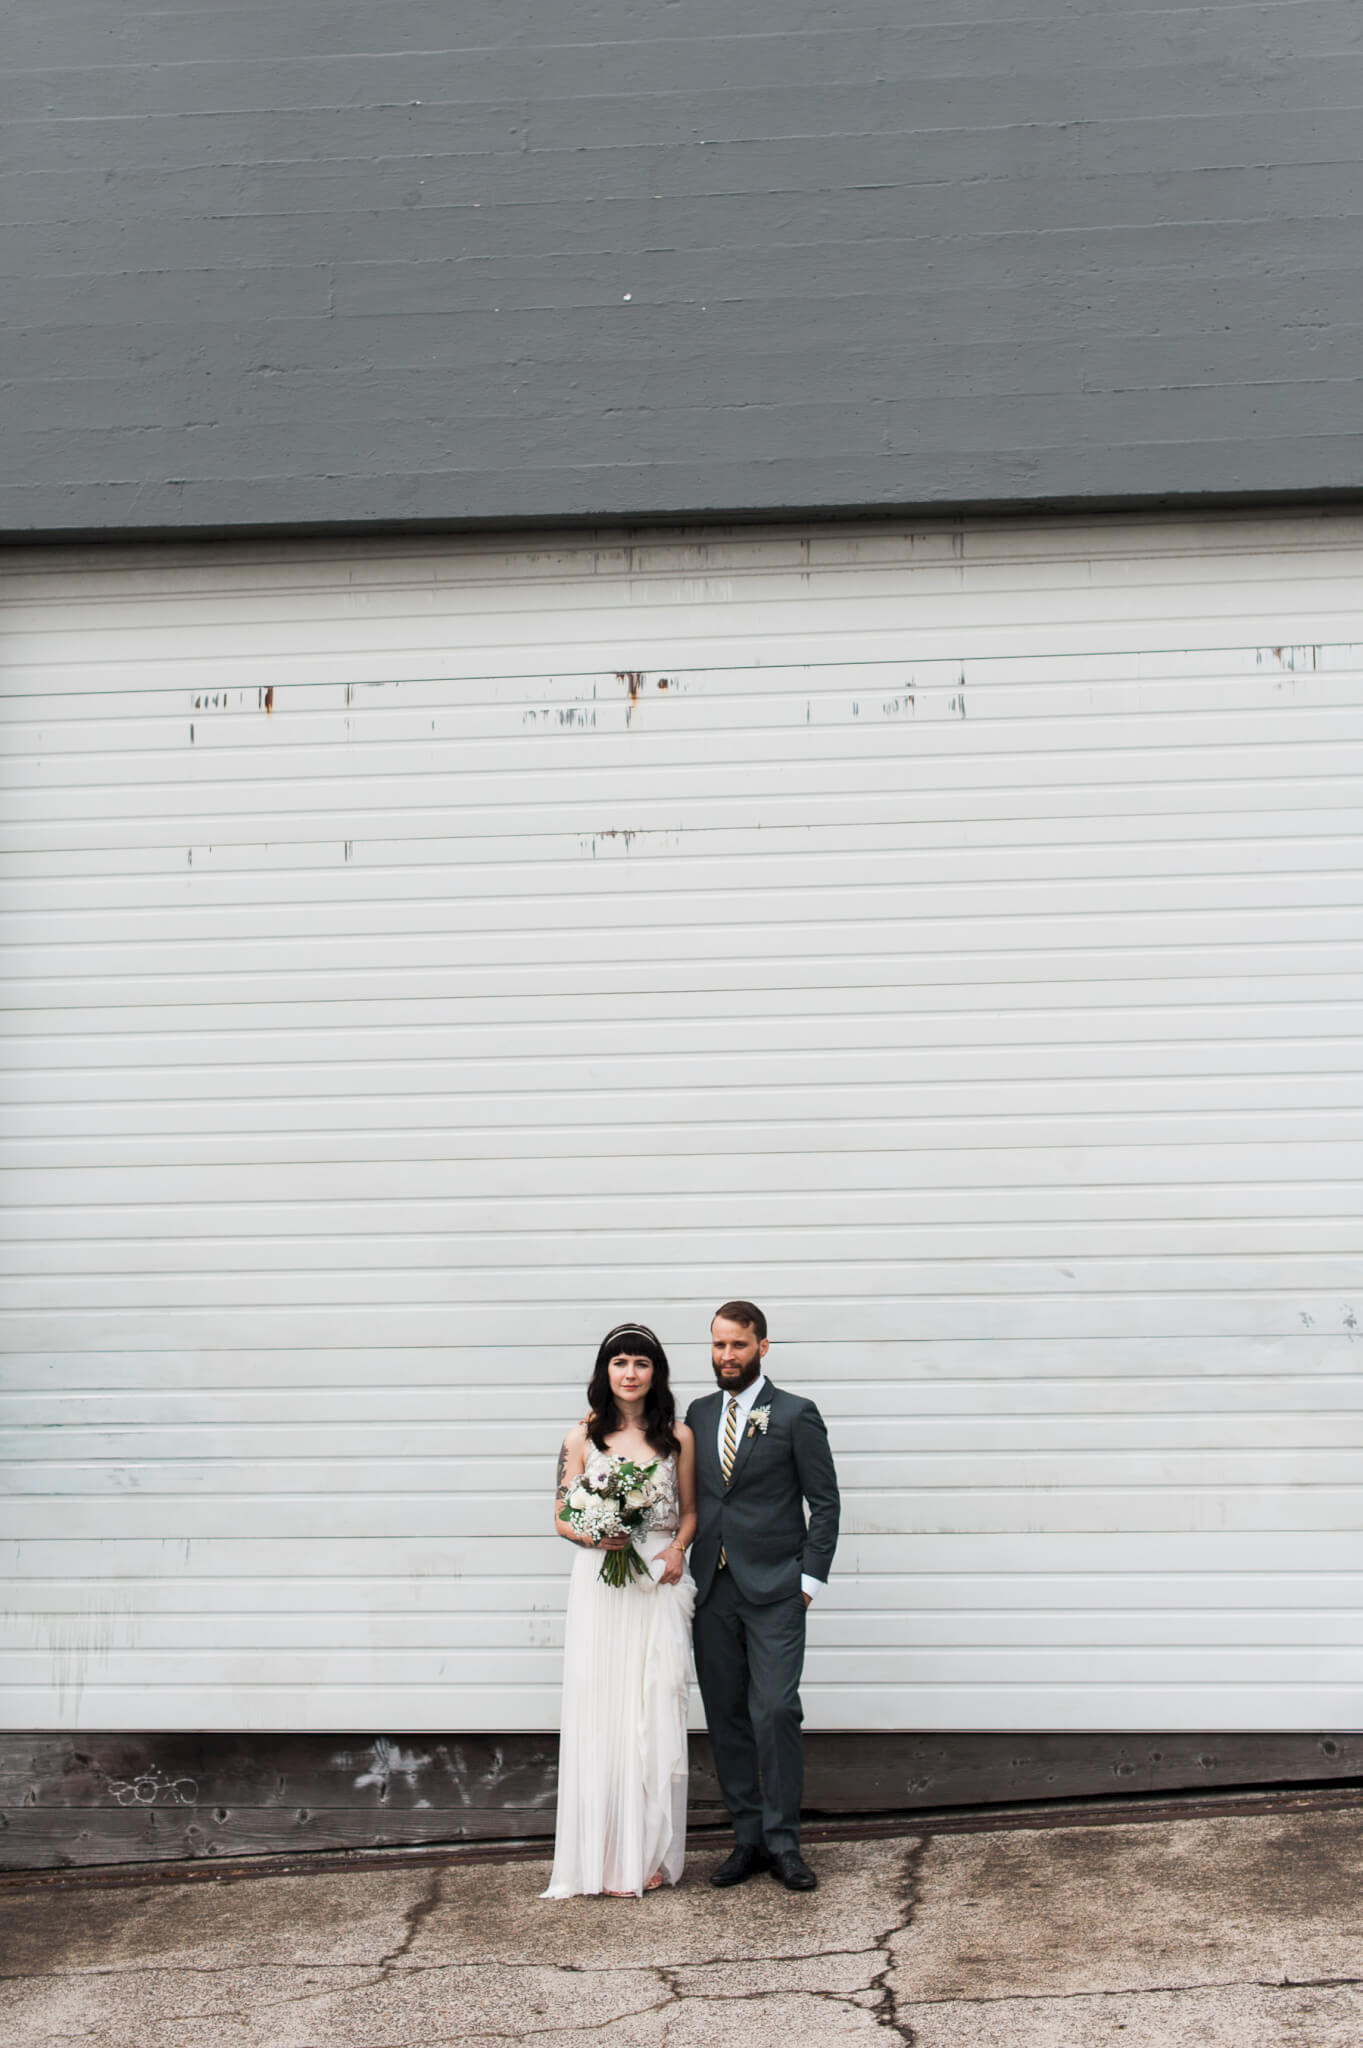 A hip bride and groom pose after their wedding at Holocene in Portland, Oregon.